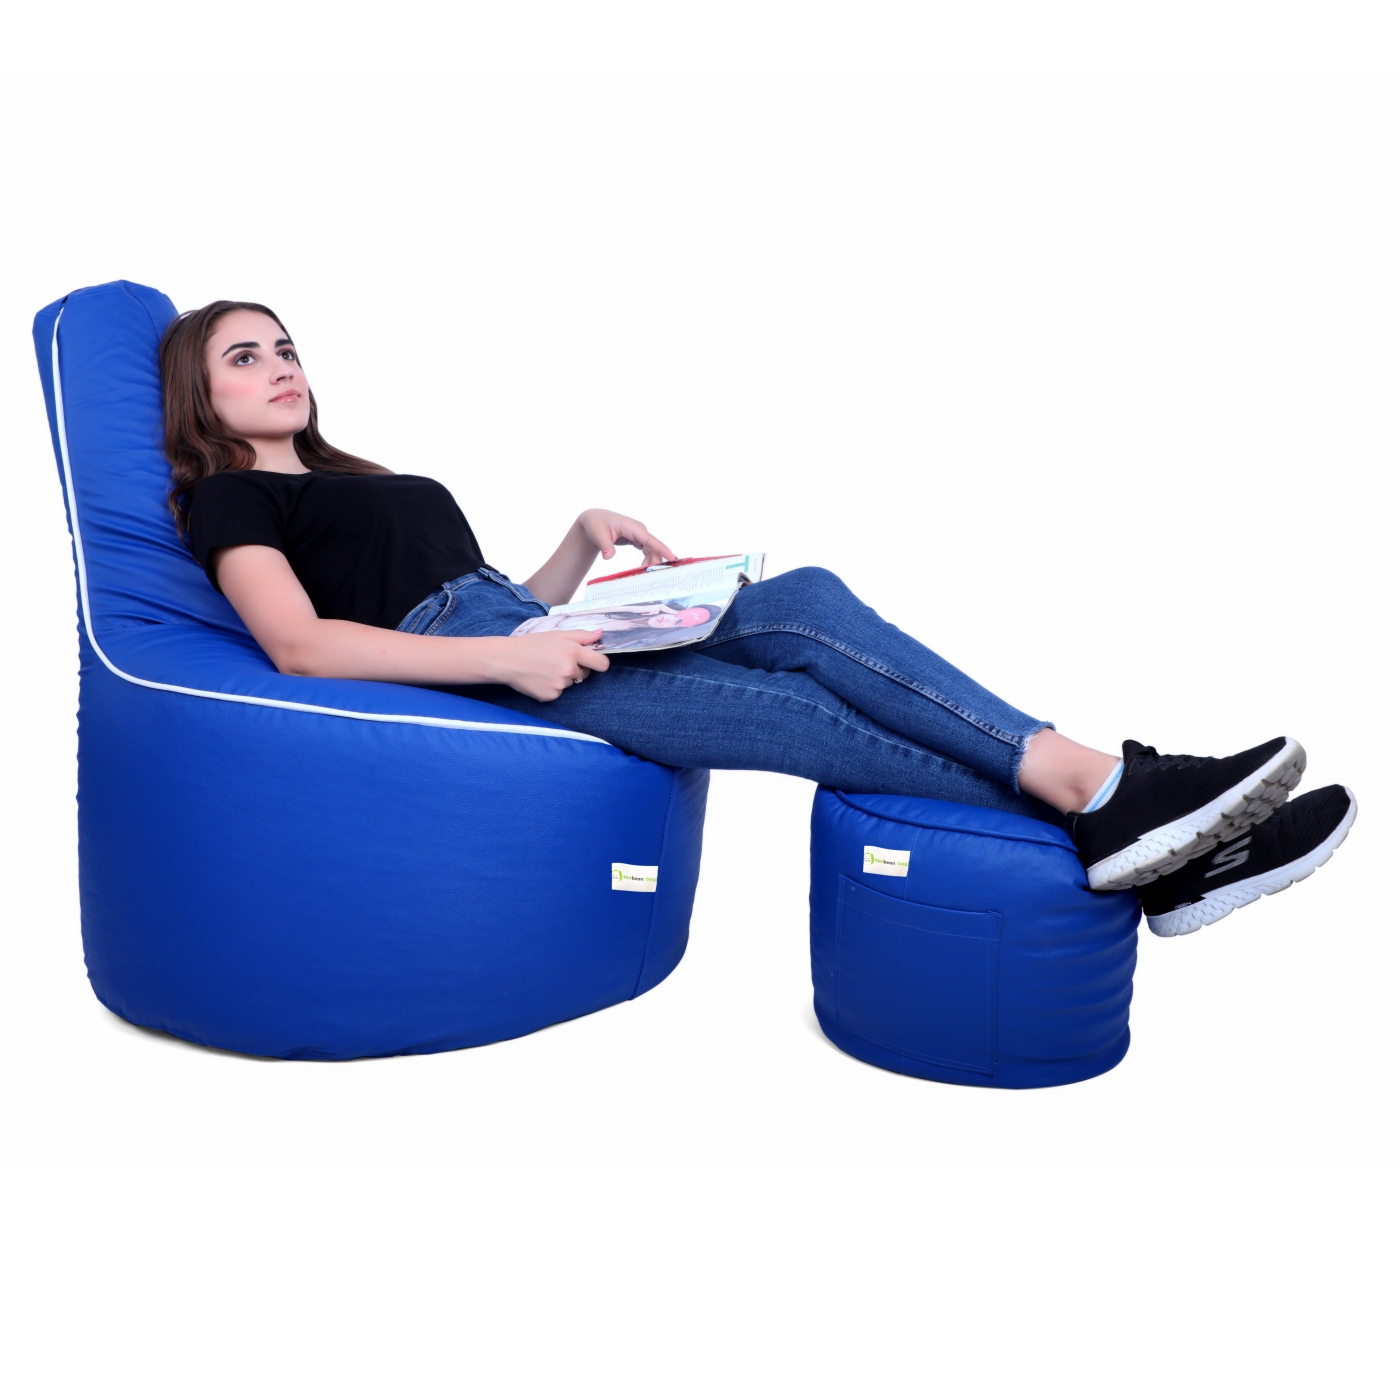 Can Bean Bags Teardrop Chair Blue With White Piping  